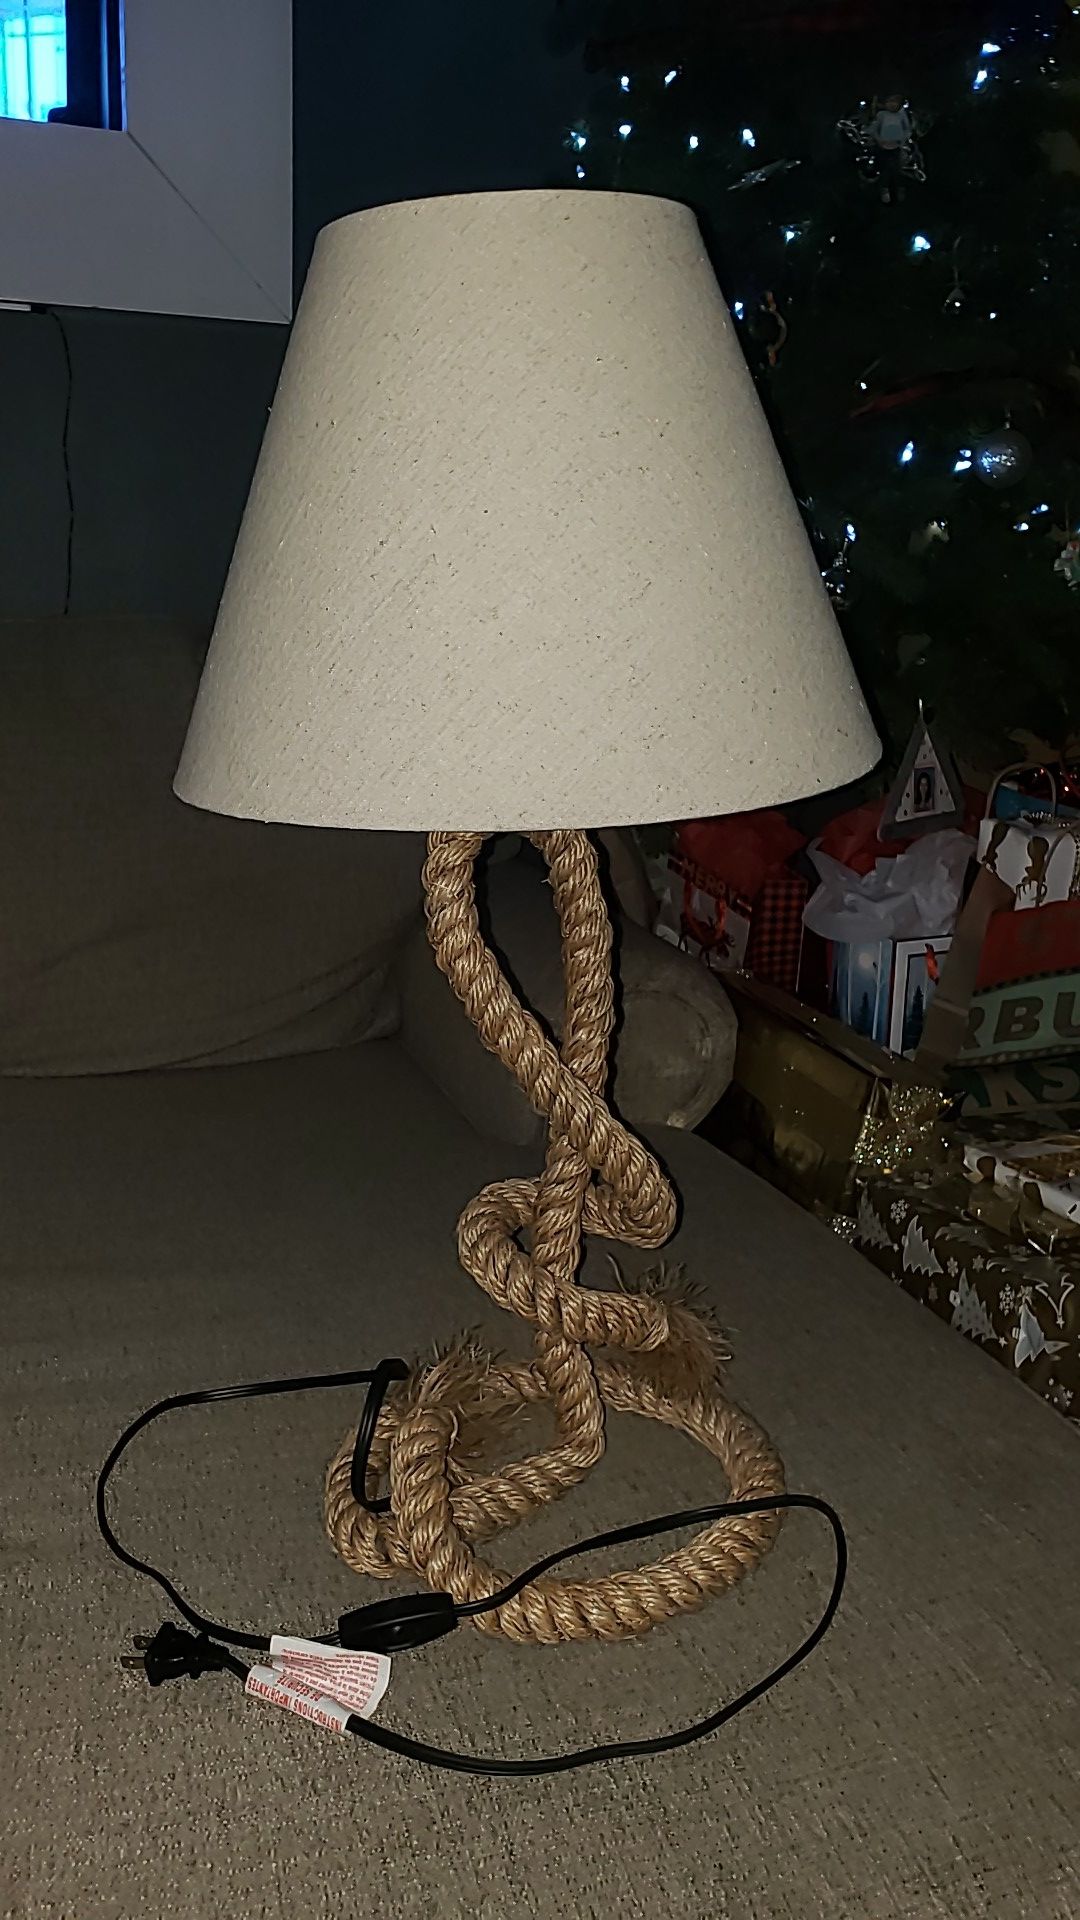 Knots table lamp